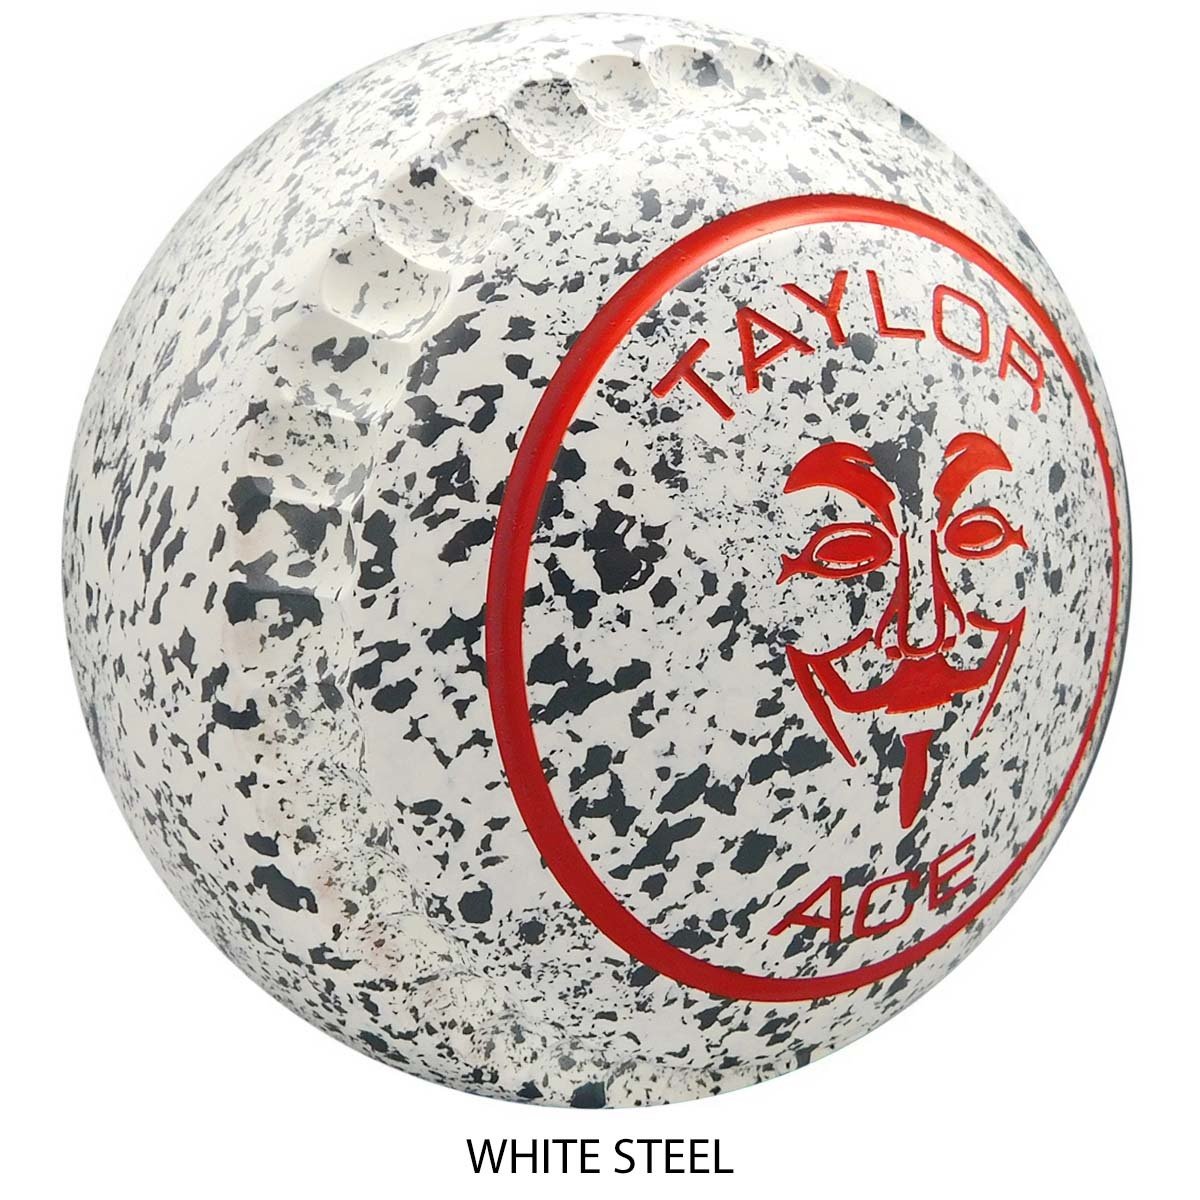 Ace with Xtreme Grip in Stock Taylor | Taylor Bowls Taylor